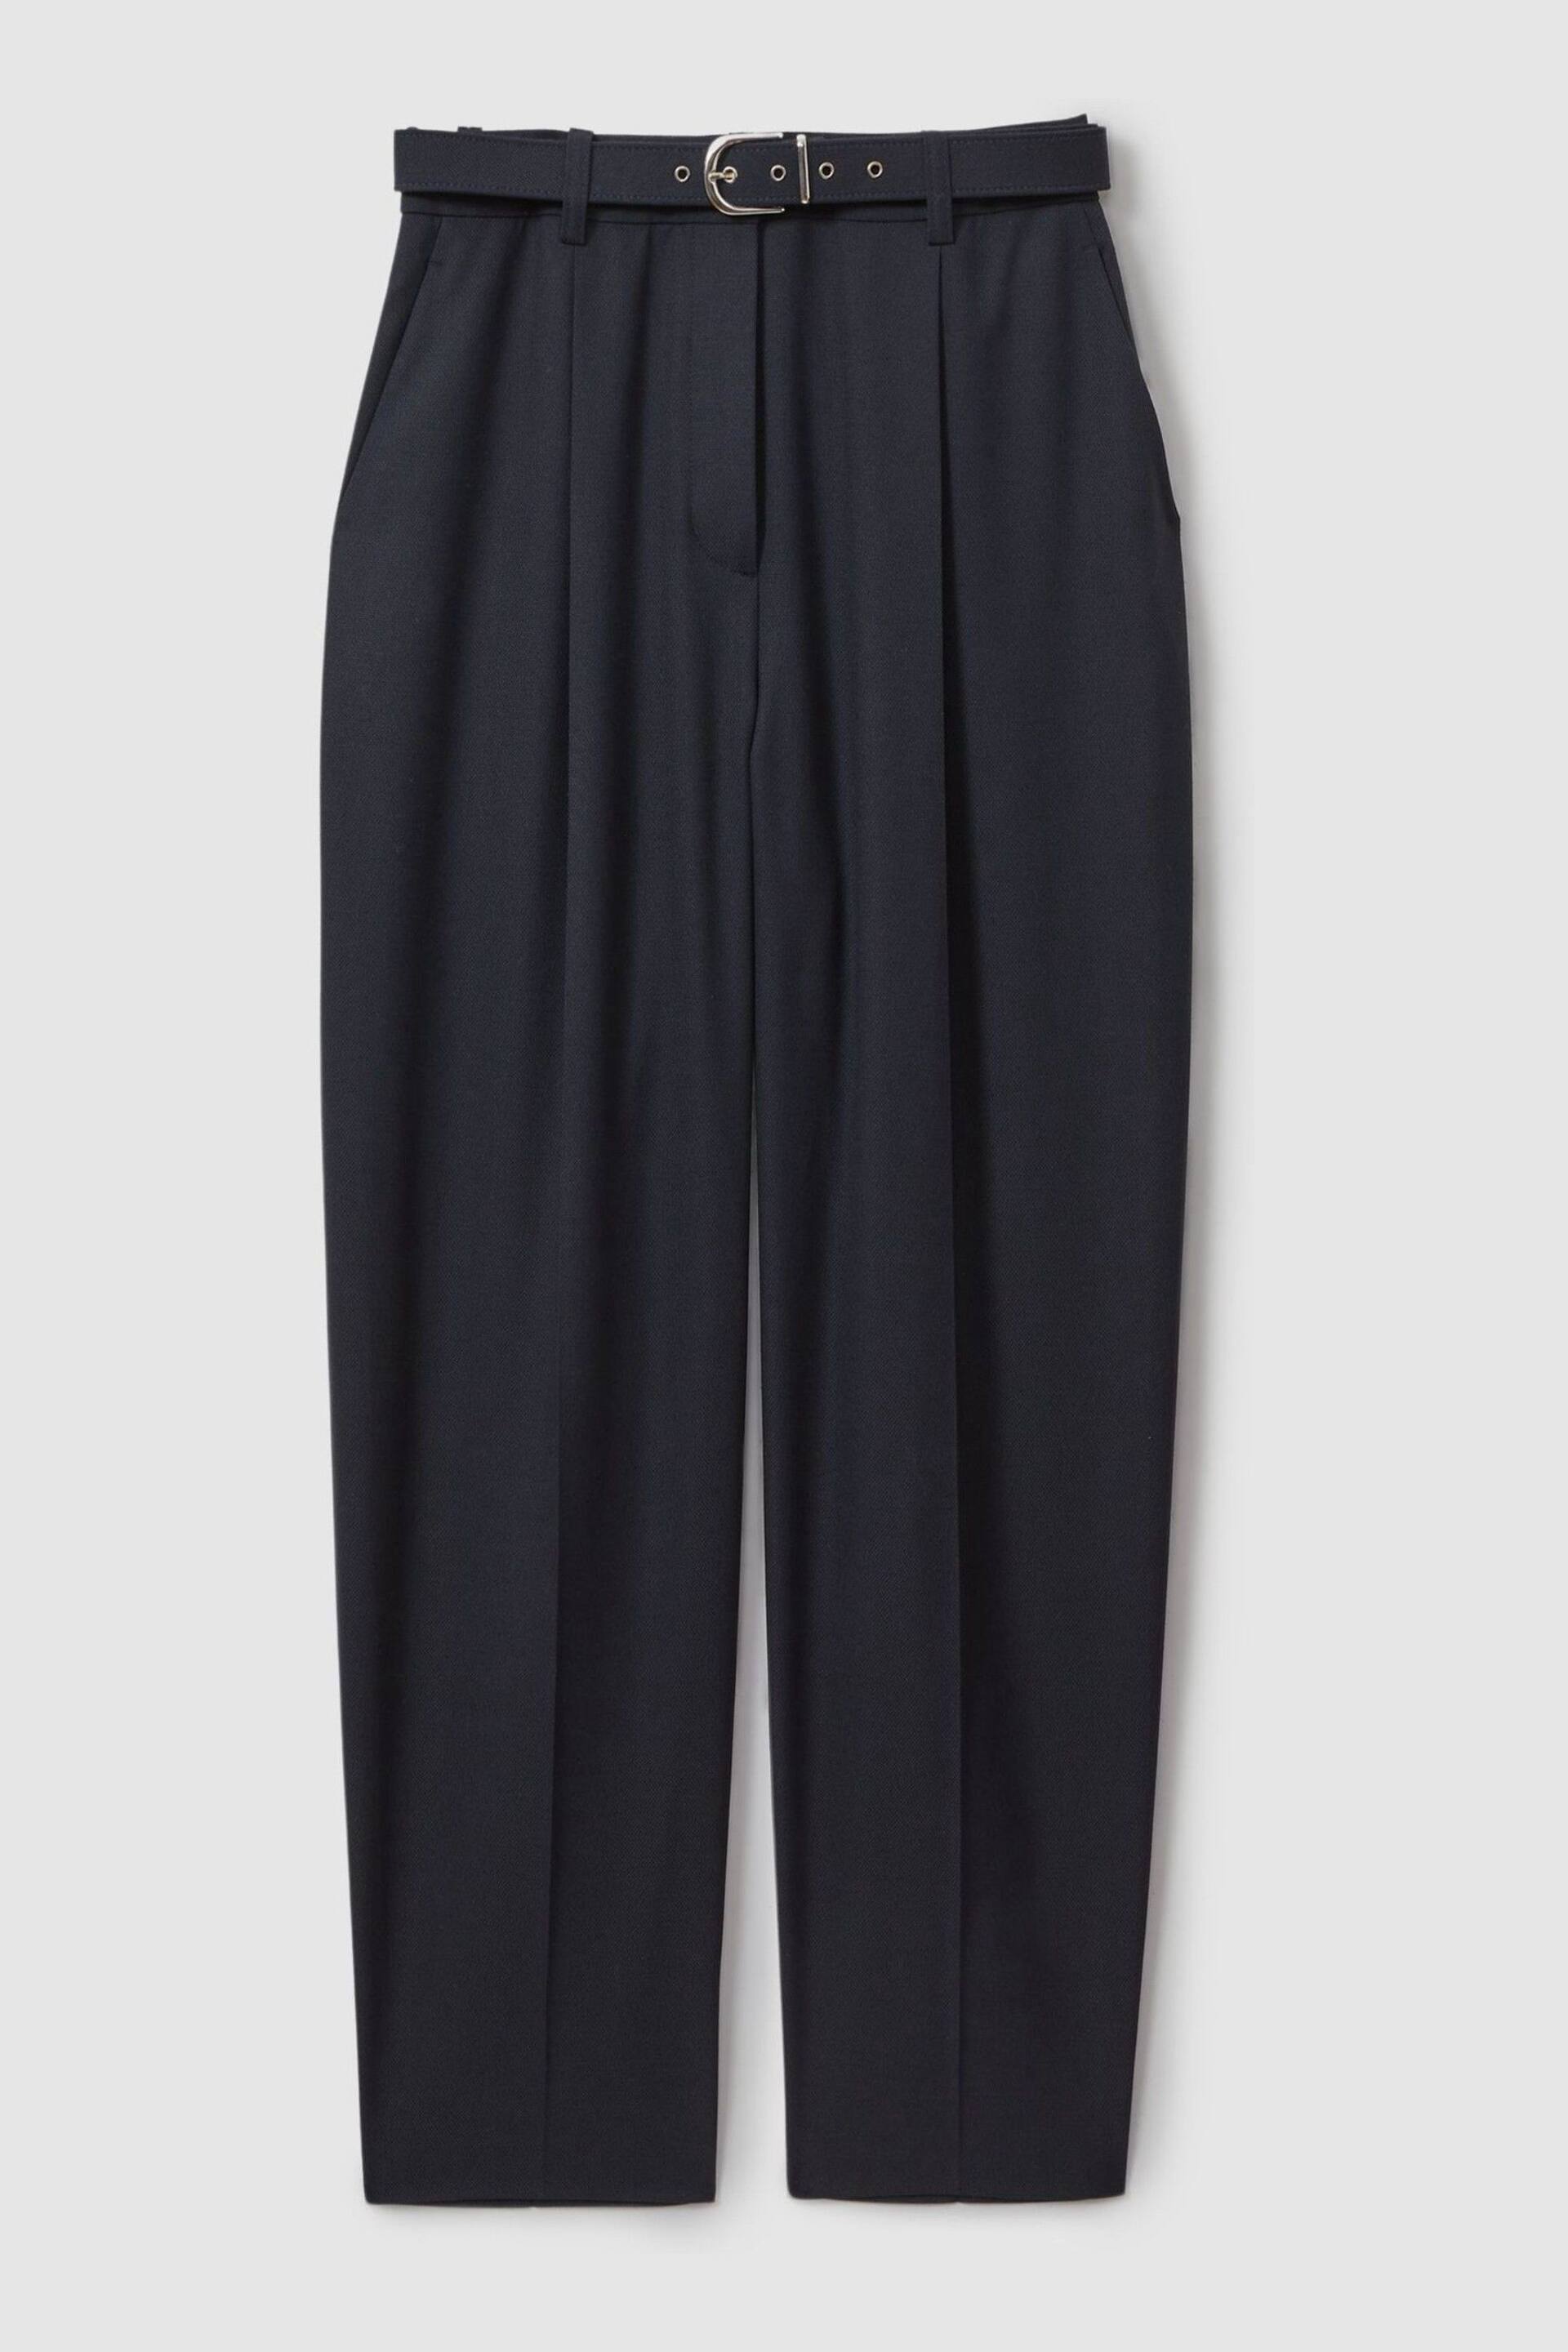 Reiss Navy Freja Petite Tapered Belted Trousers - Image 2 of 7